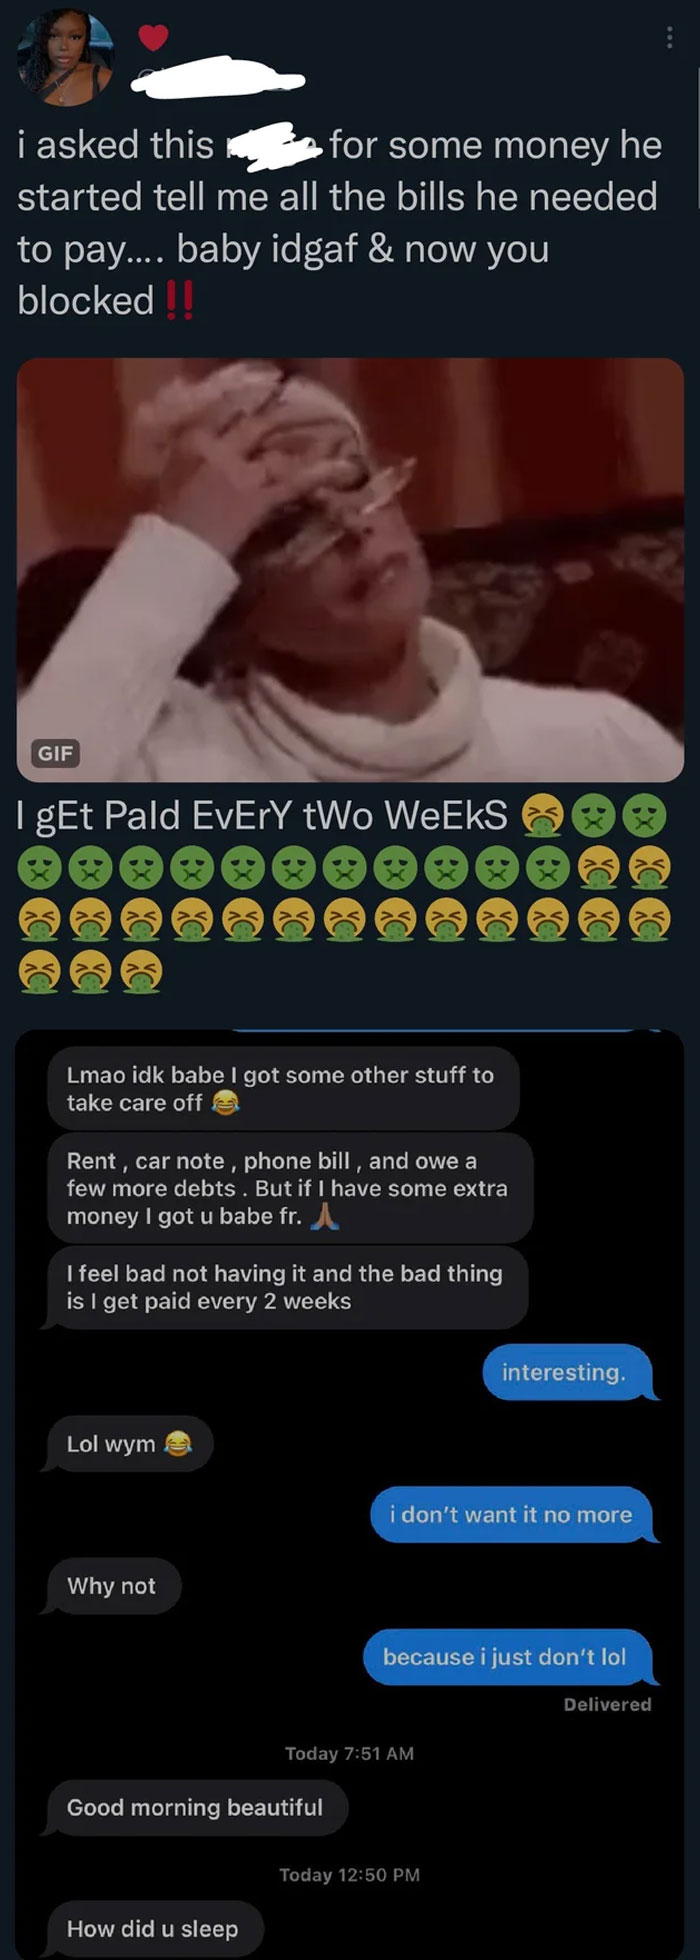 Girls Asks Her Man For Money And Gets Upset When He Says He's Got Things To Pay